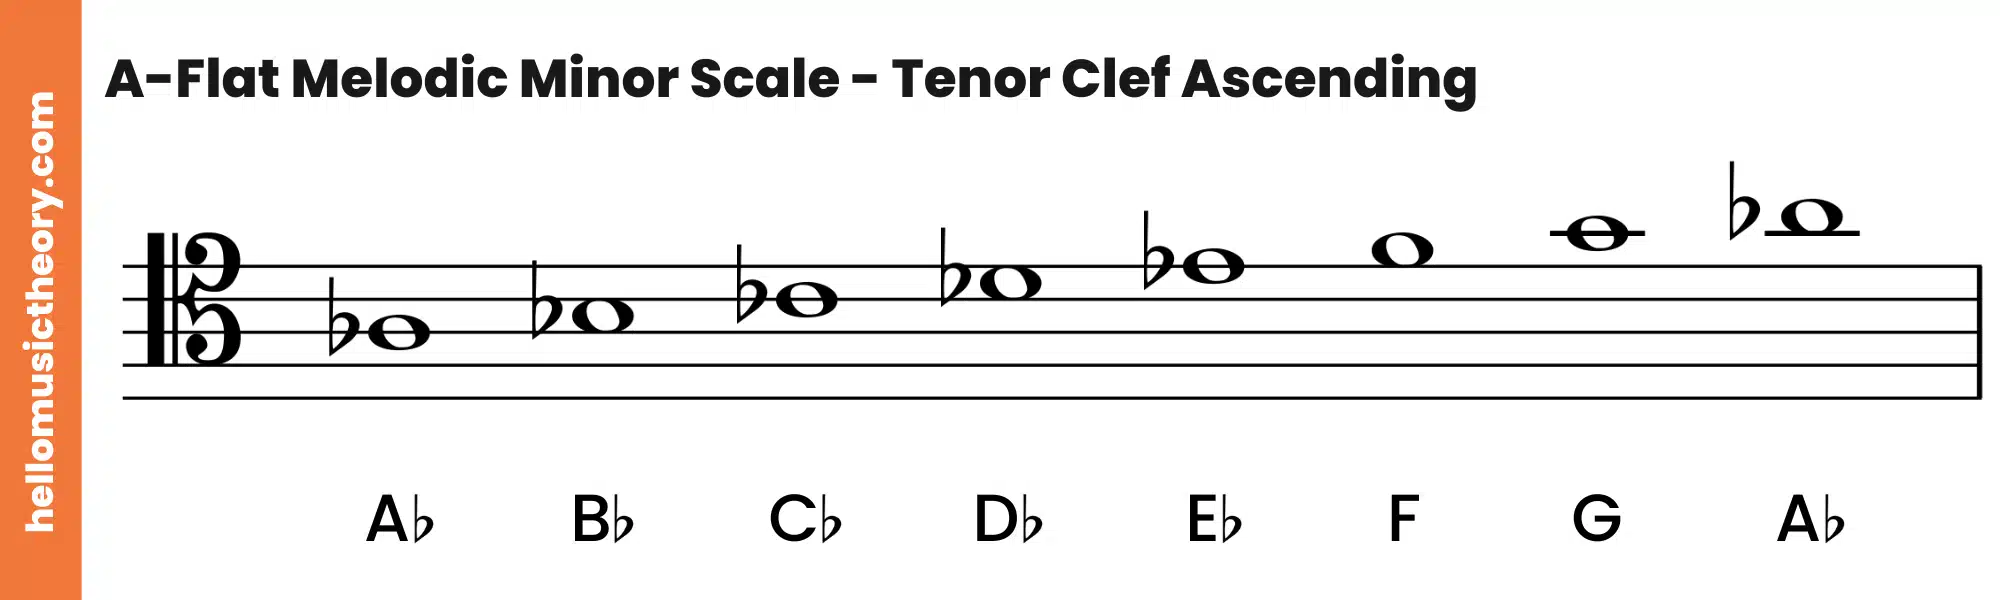 A-Flat Melodic Minor Scale Tenor Clef Ascending